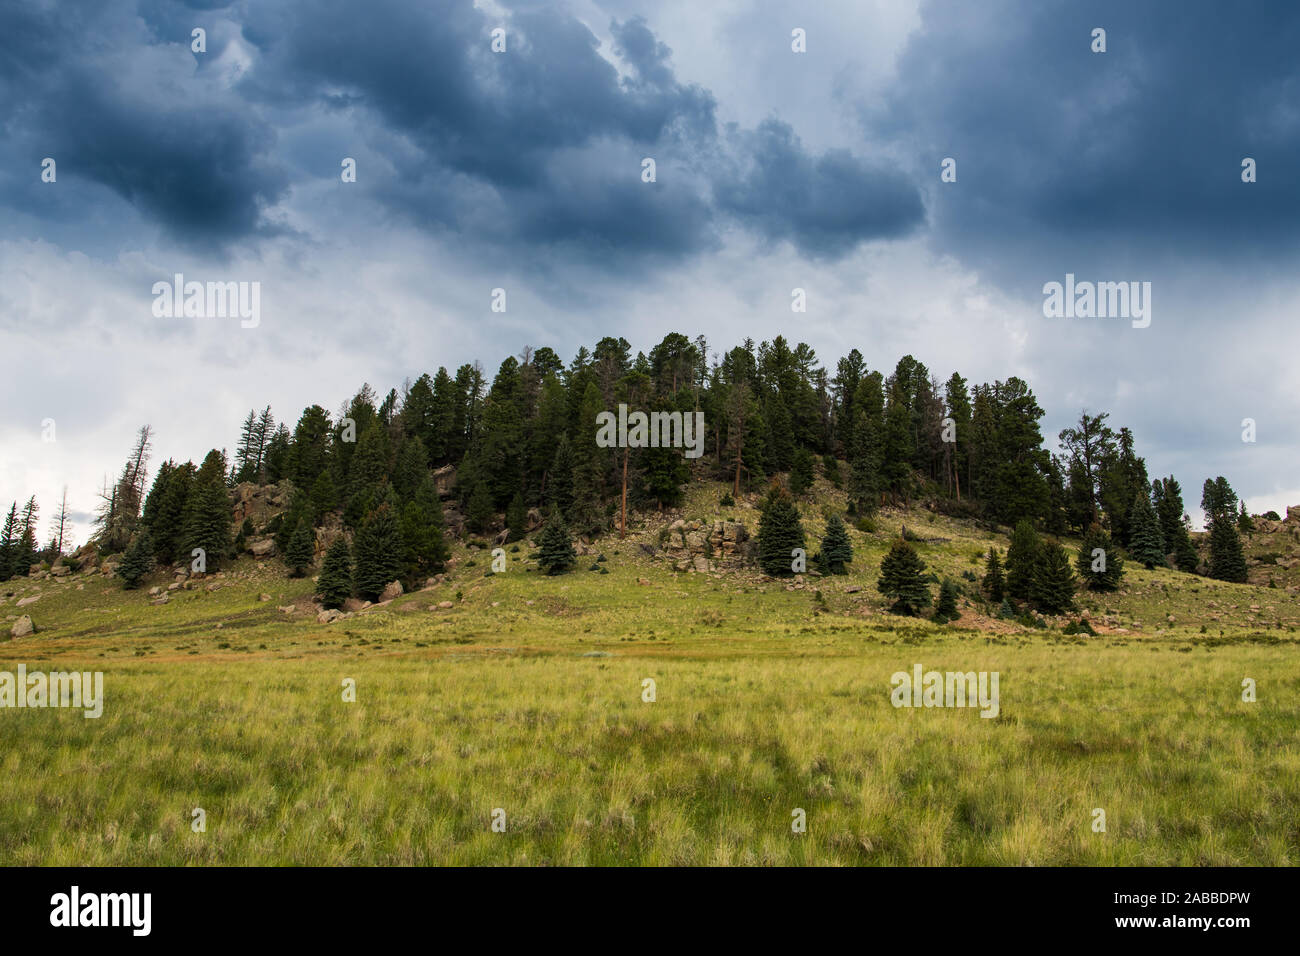 Ominous dark gray storm clouds above a forested hill and grassylands in the Valles Caldera National Preserve in New Mexico, USA Stock Photo